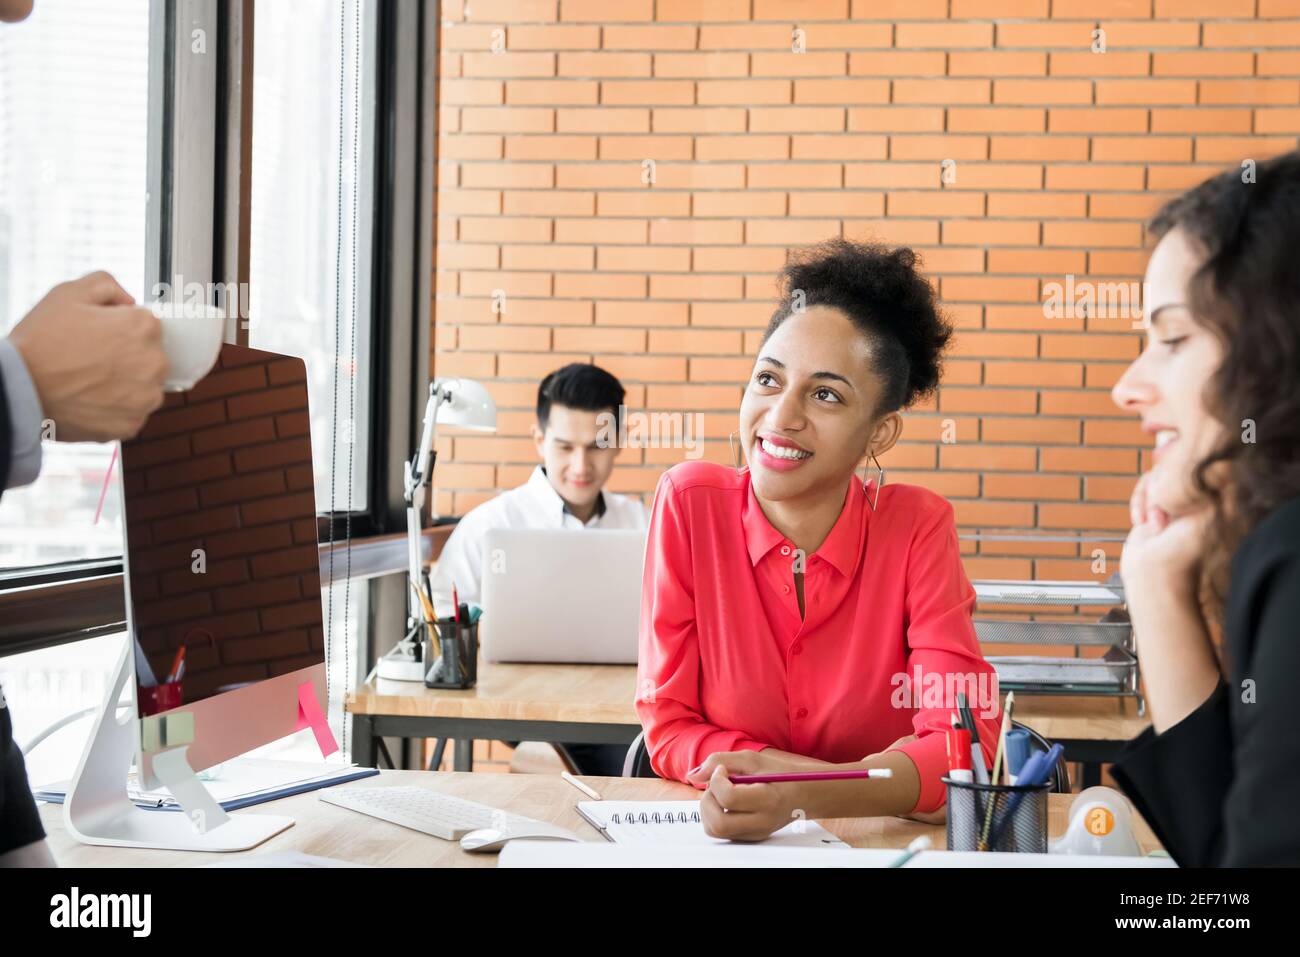 Friendly black businesswoman in co-working space with multiethnic colleagues Stock Photo